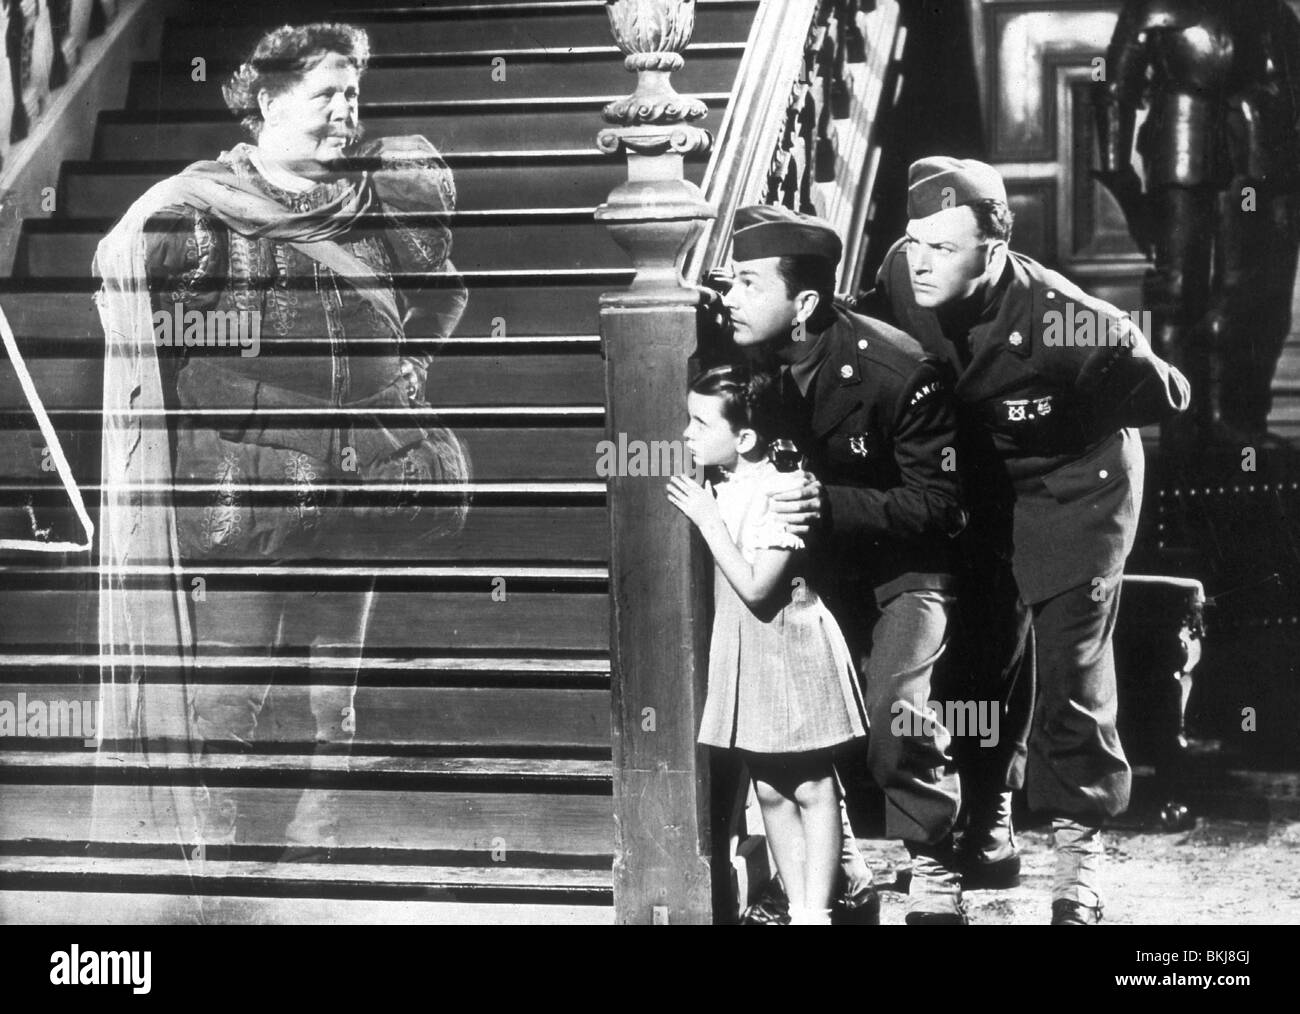 CANTERVILLE GHOST (1944) CHARLES LAUGHTON, Margaret O'BRIEN, ROBERT YOUNG, WILLIAM GARGAN CGHT 001 Banque D'Images